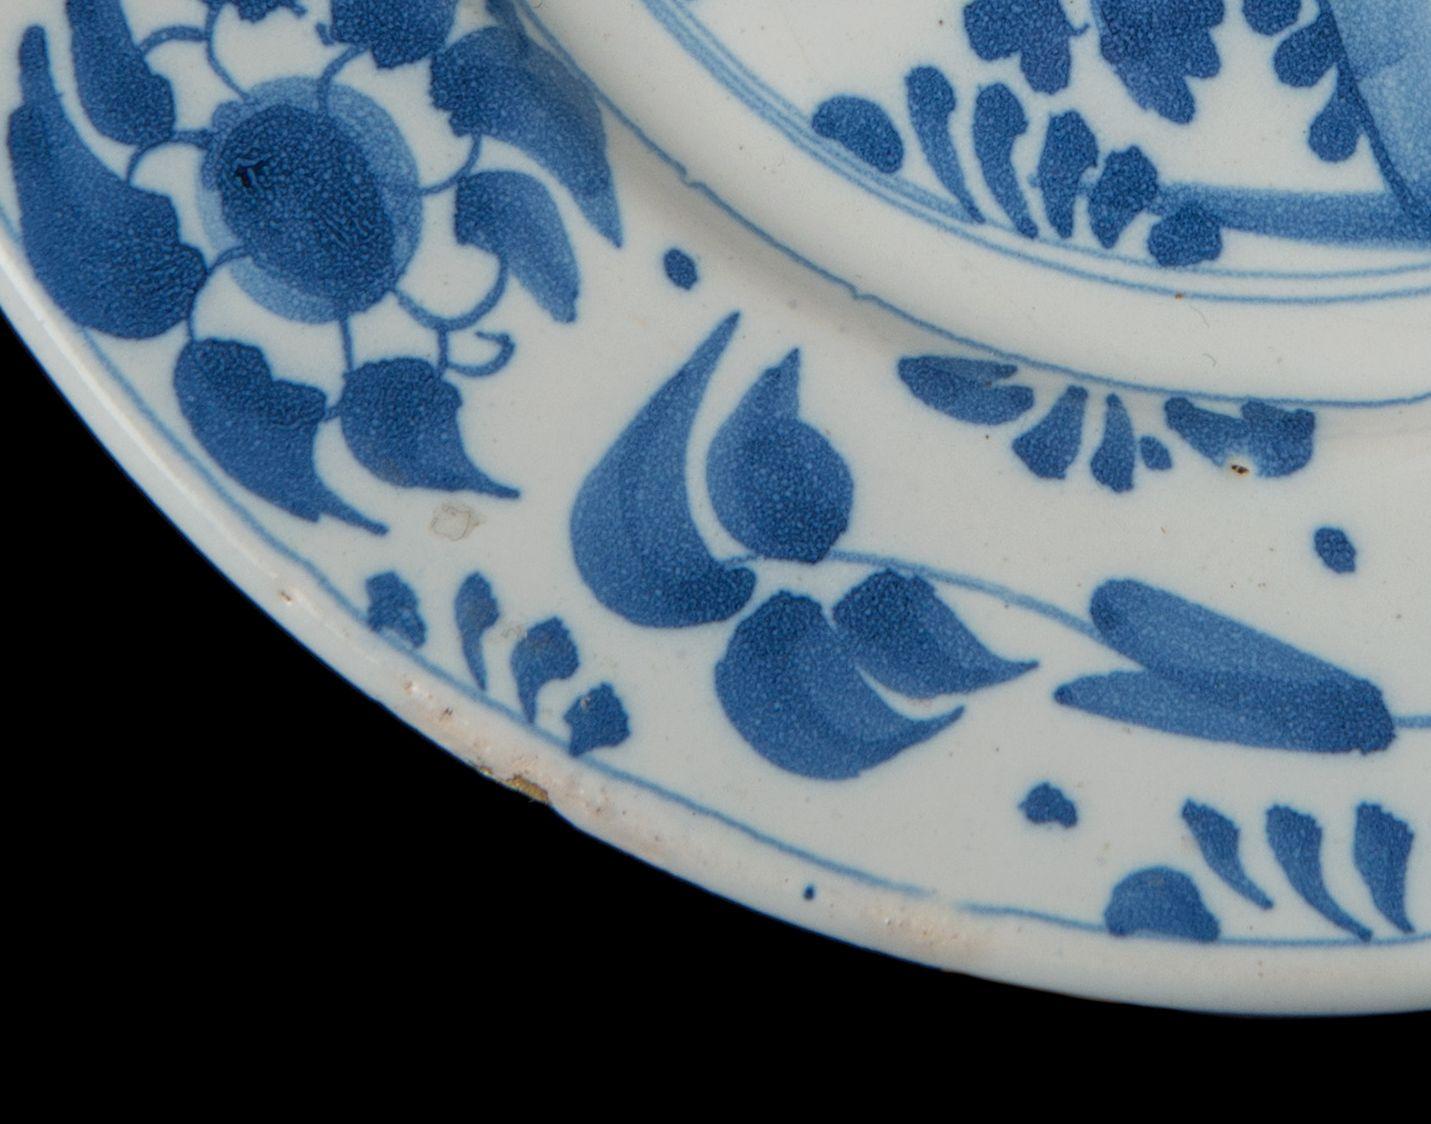 Ceramic Blue and White Plate with Flower Vase. Delft, 1650-1680